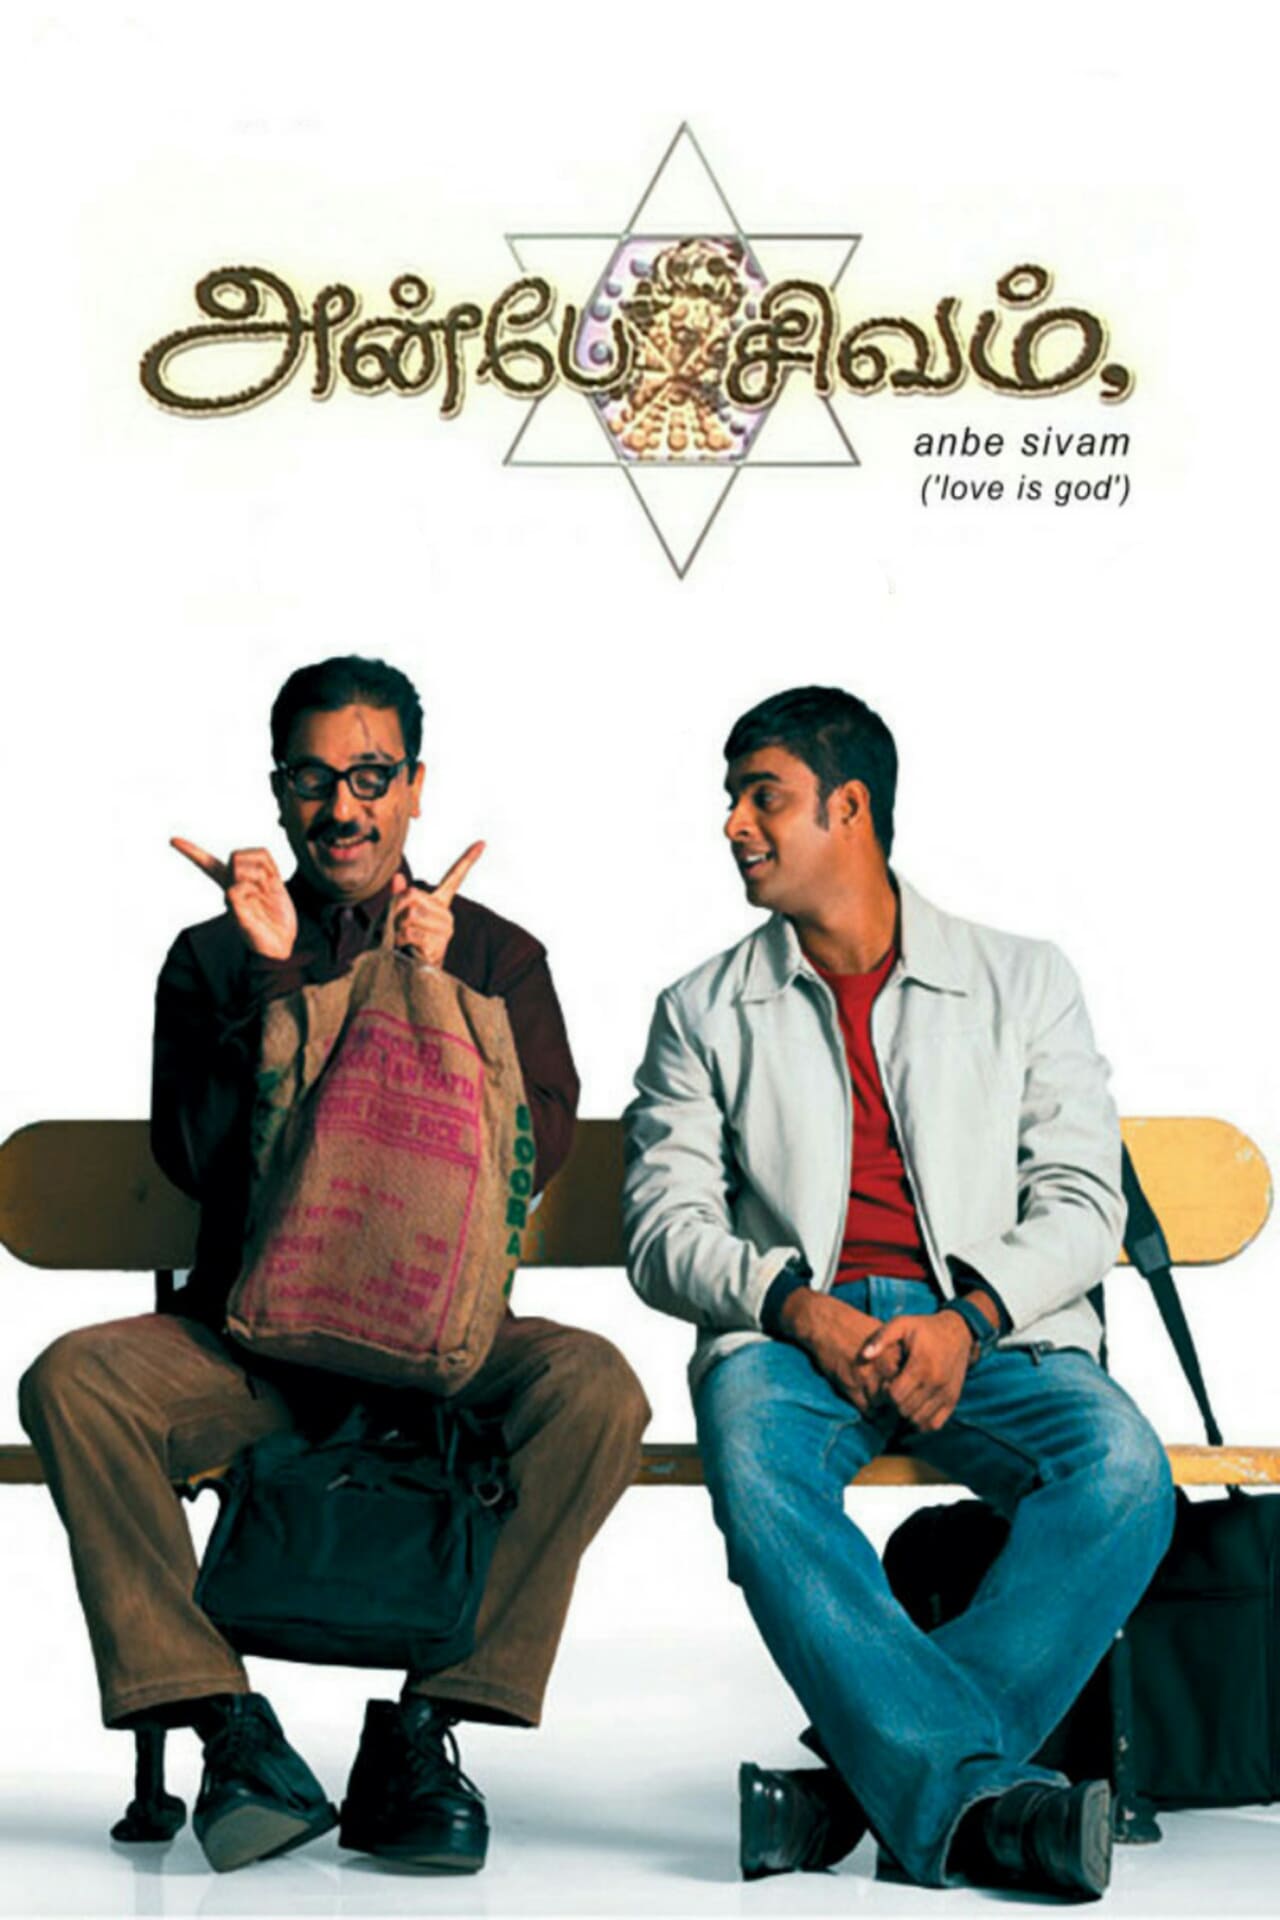 Poster for the movie "Anbe Sivam"